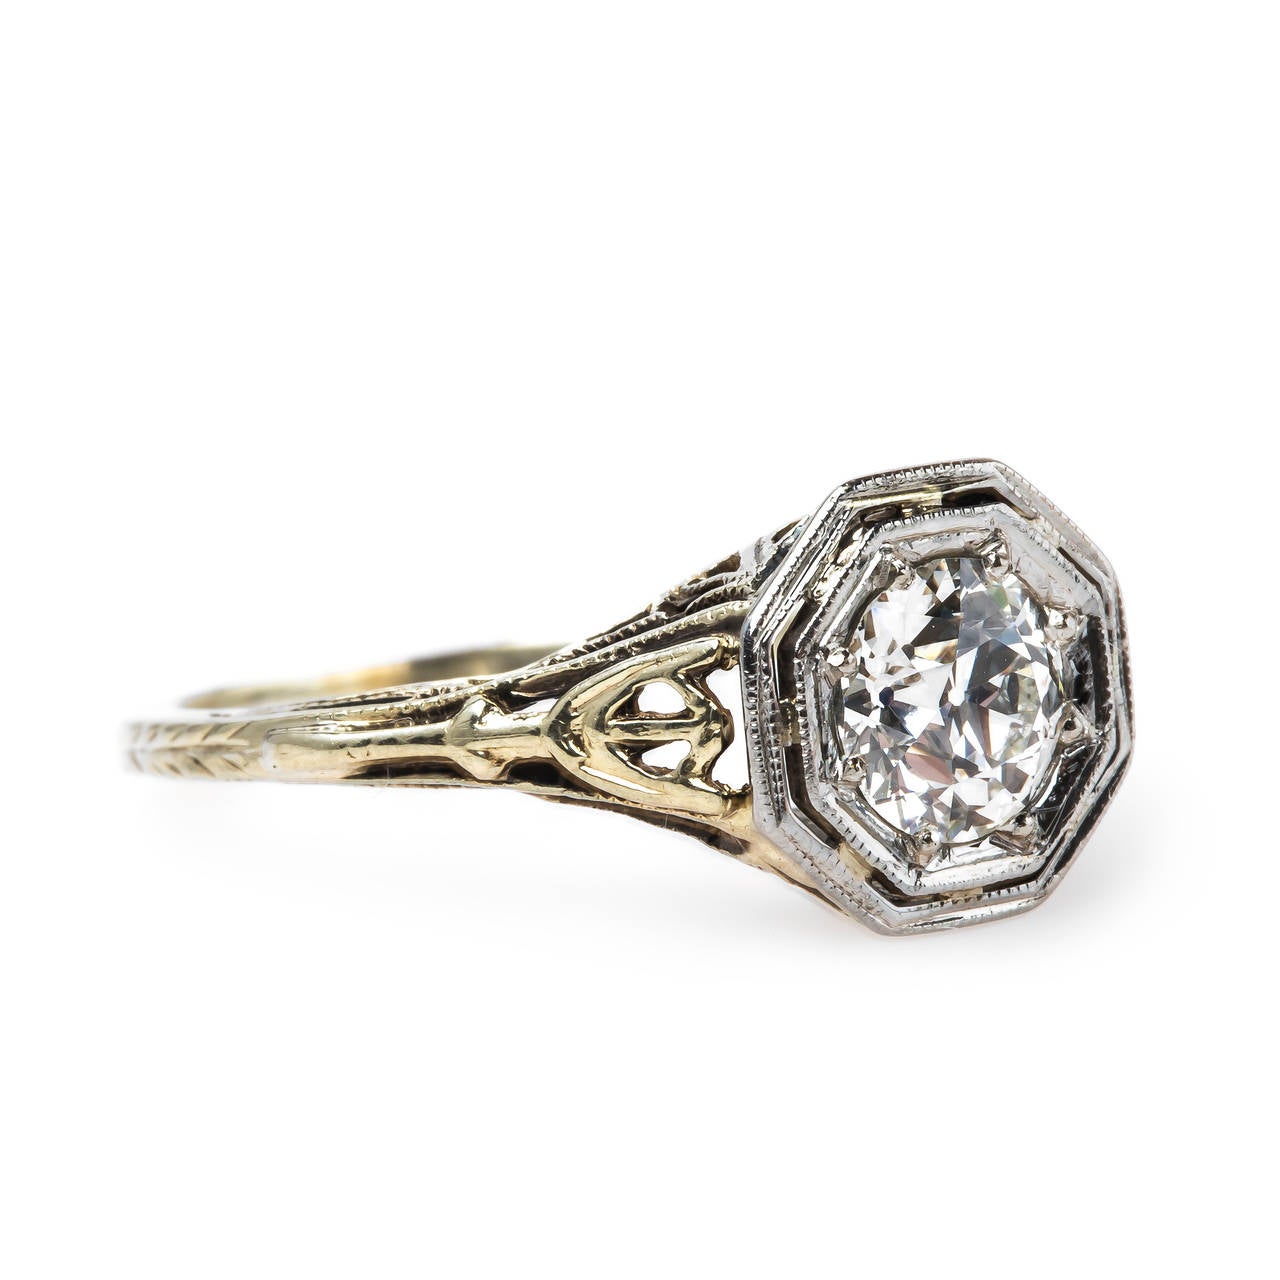 Dorchester is a romantic and beautifully detailed Edwardian era (circa 1905) ring made from 14k white and yellow gold centering a 0.69ct EGL certified Old European Cut diamond graded H color and VS2 clarity. This delightful antique diamond is set